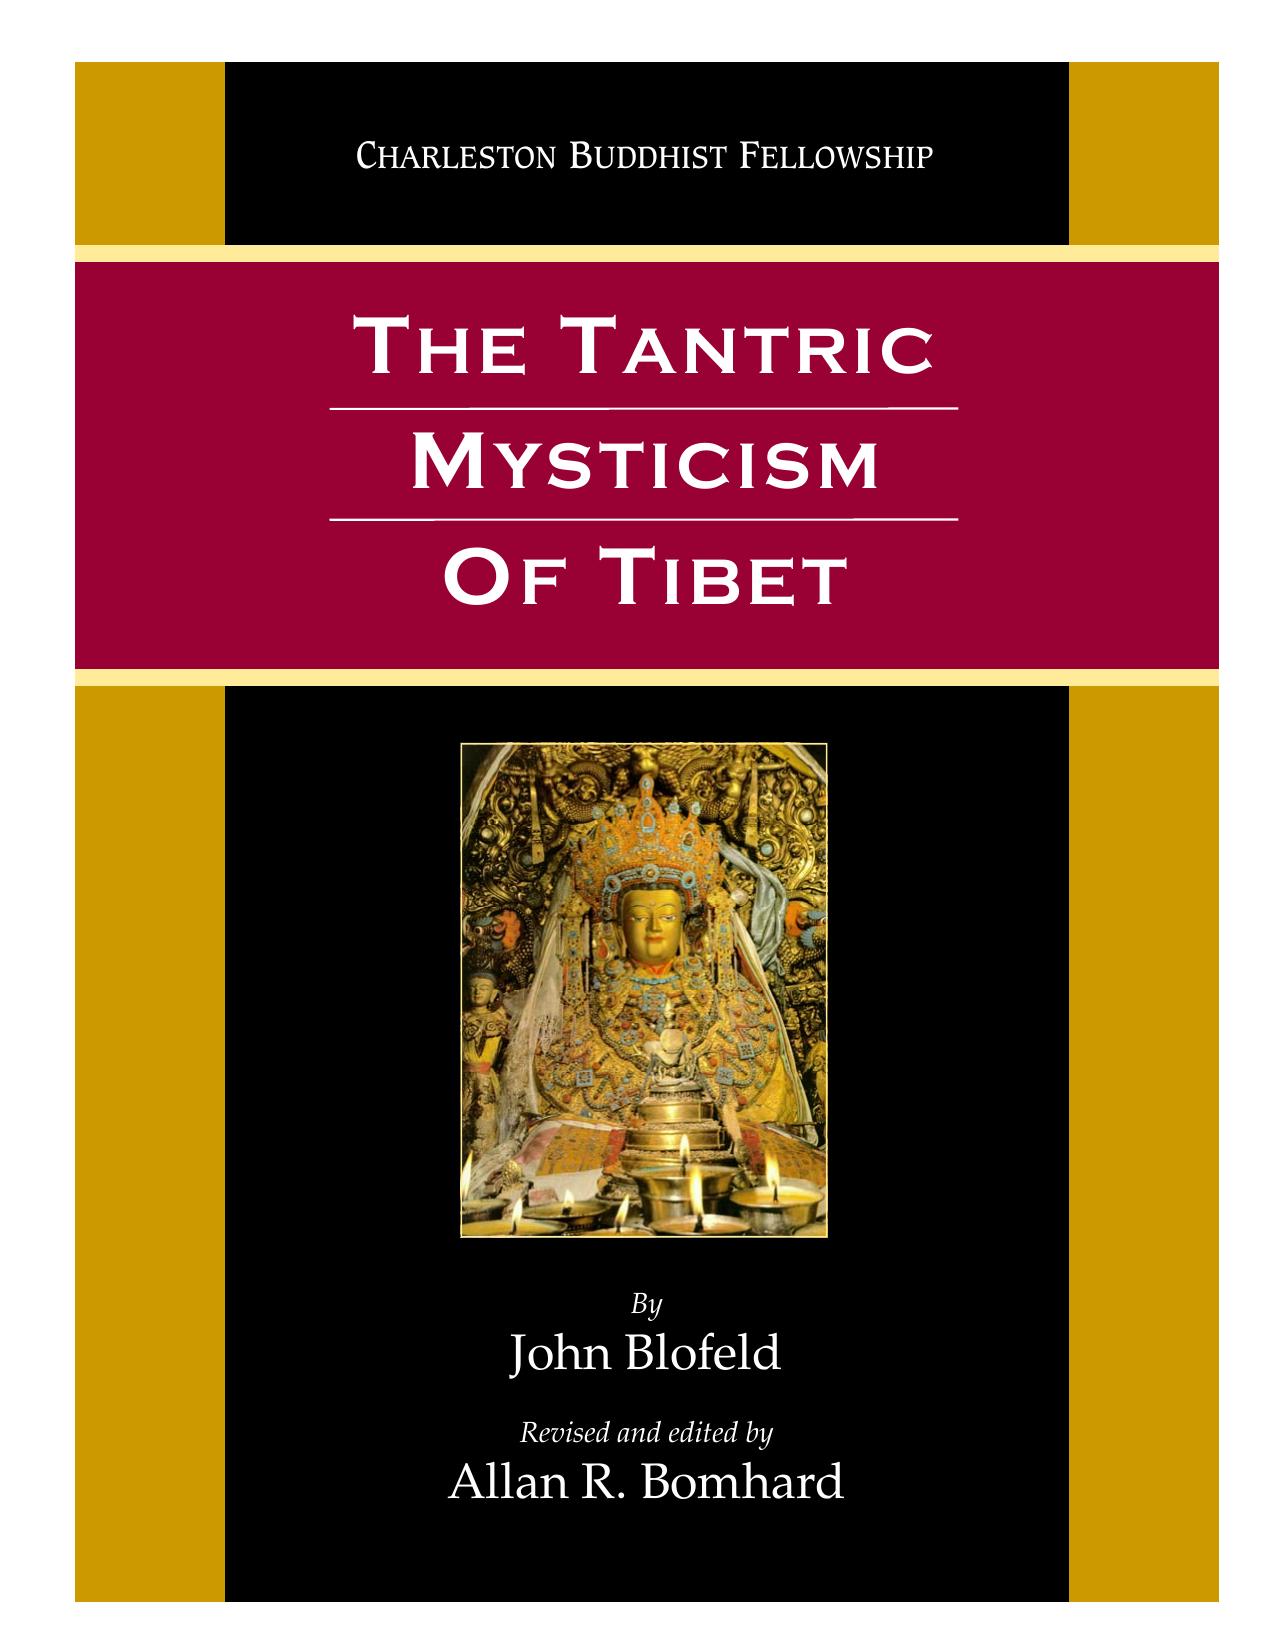 The Tantric Mysticism of Tibet: A Practical Guide